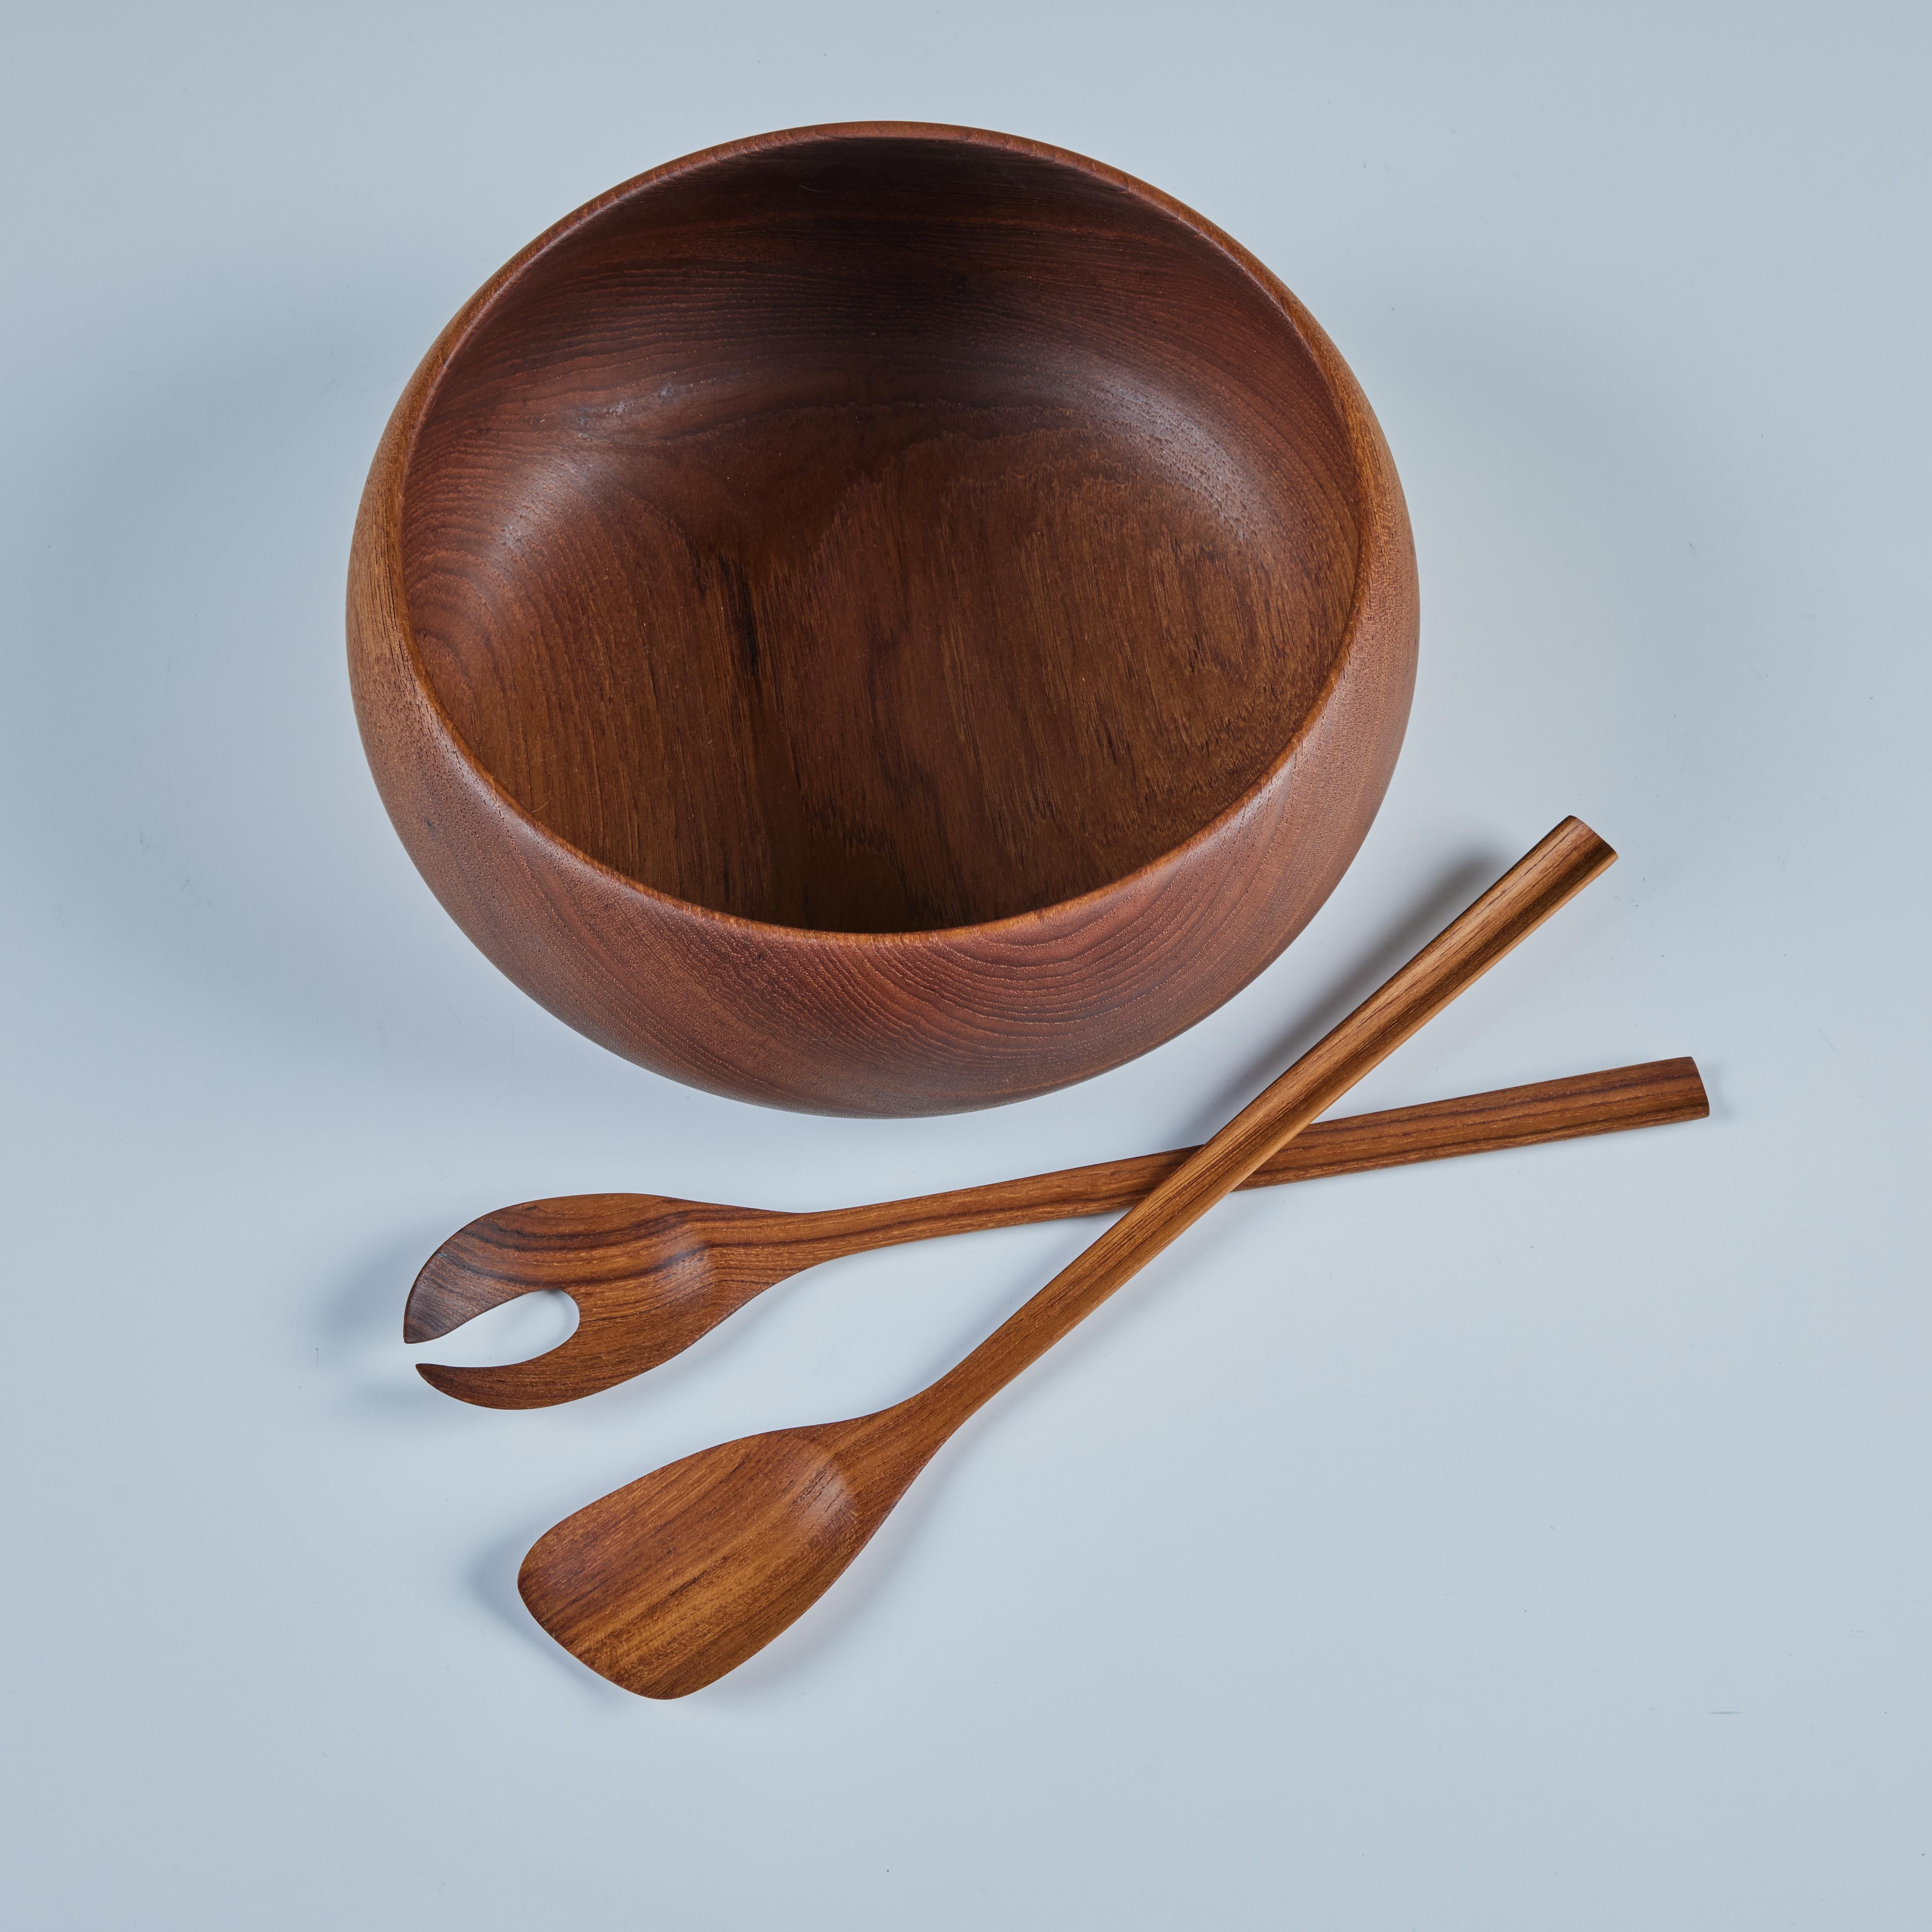 Wood Turned Bowl with Utensils For Sale 2